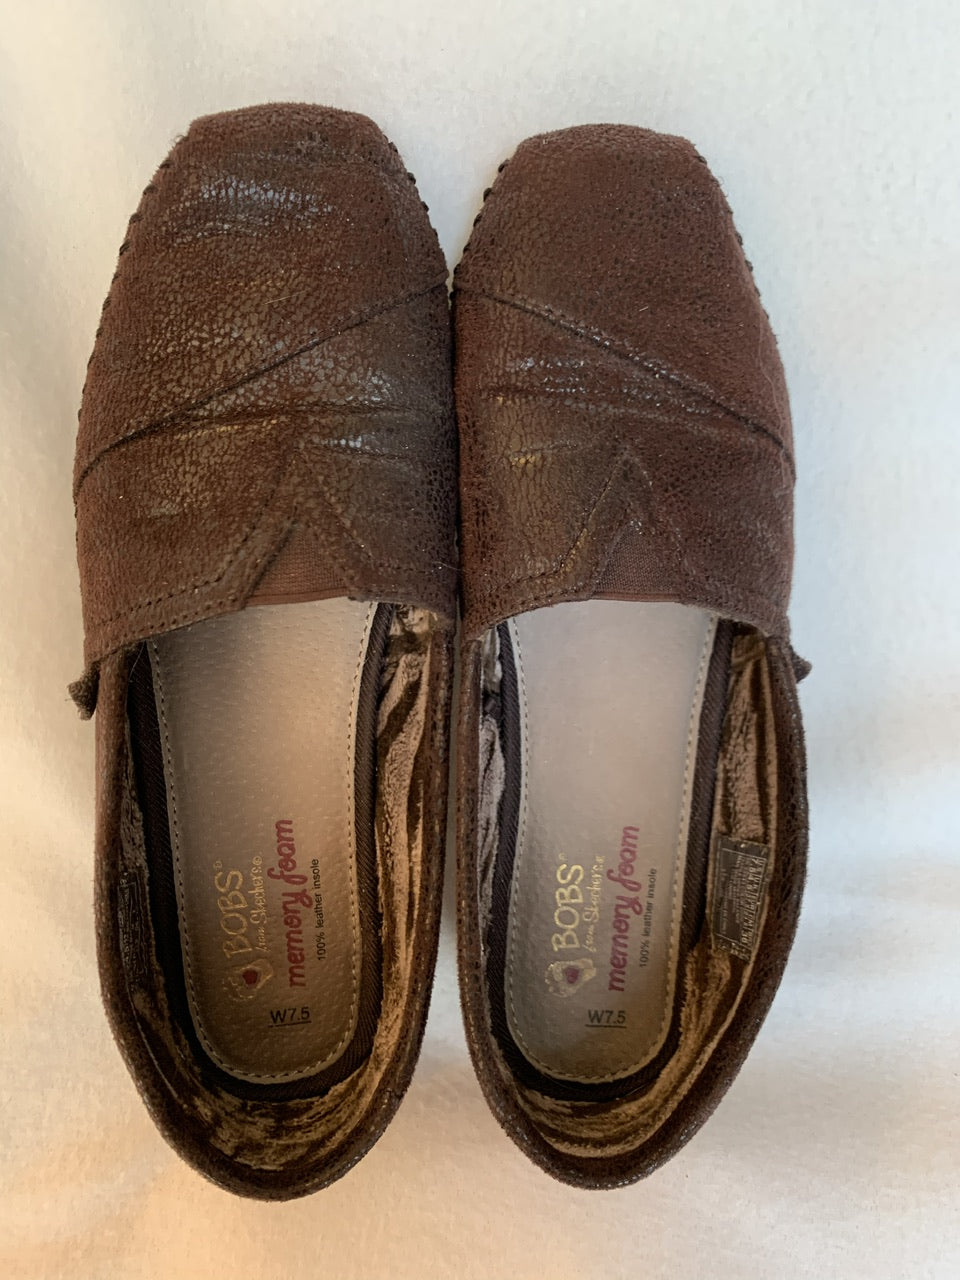 Size 7.5 Women’s BOBS by Skechers Brown Slip On Shoes